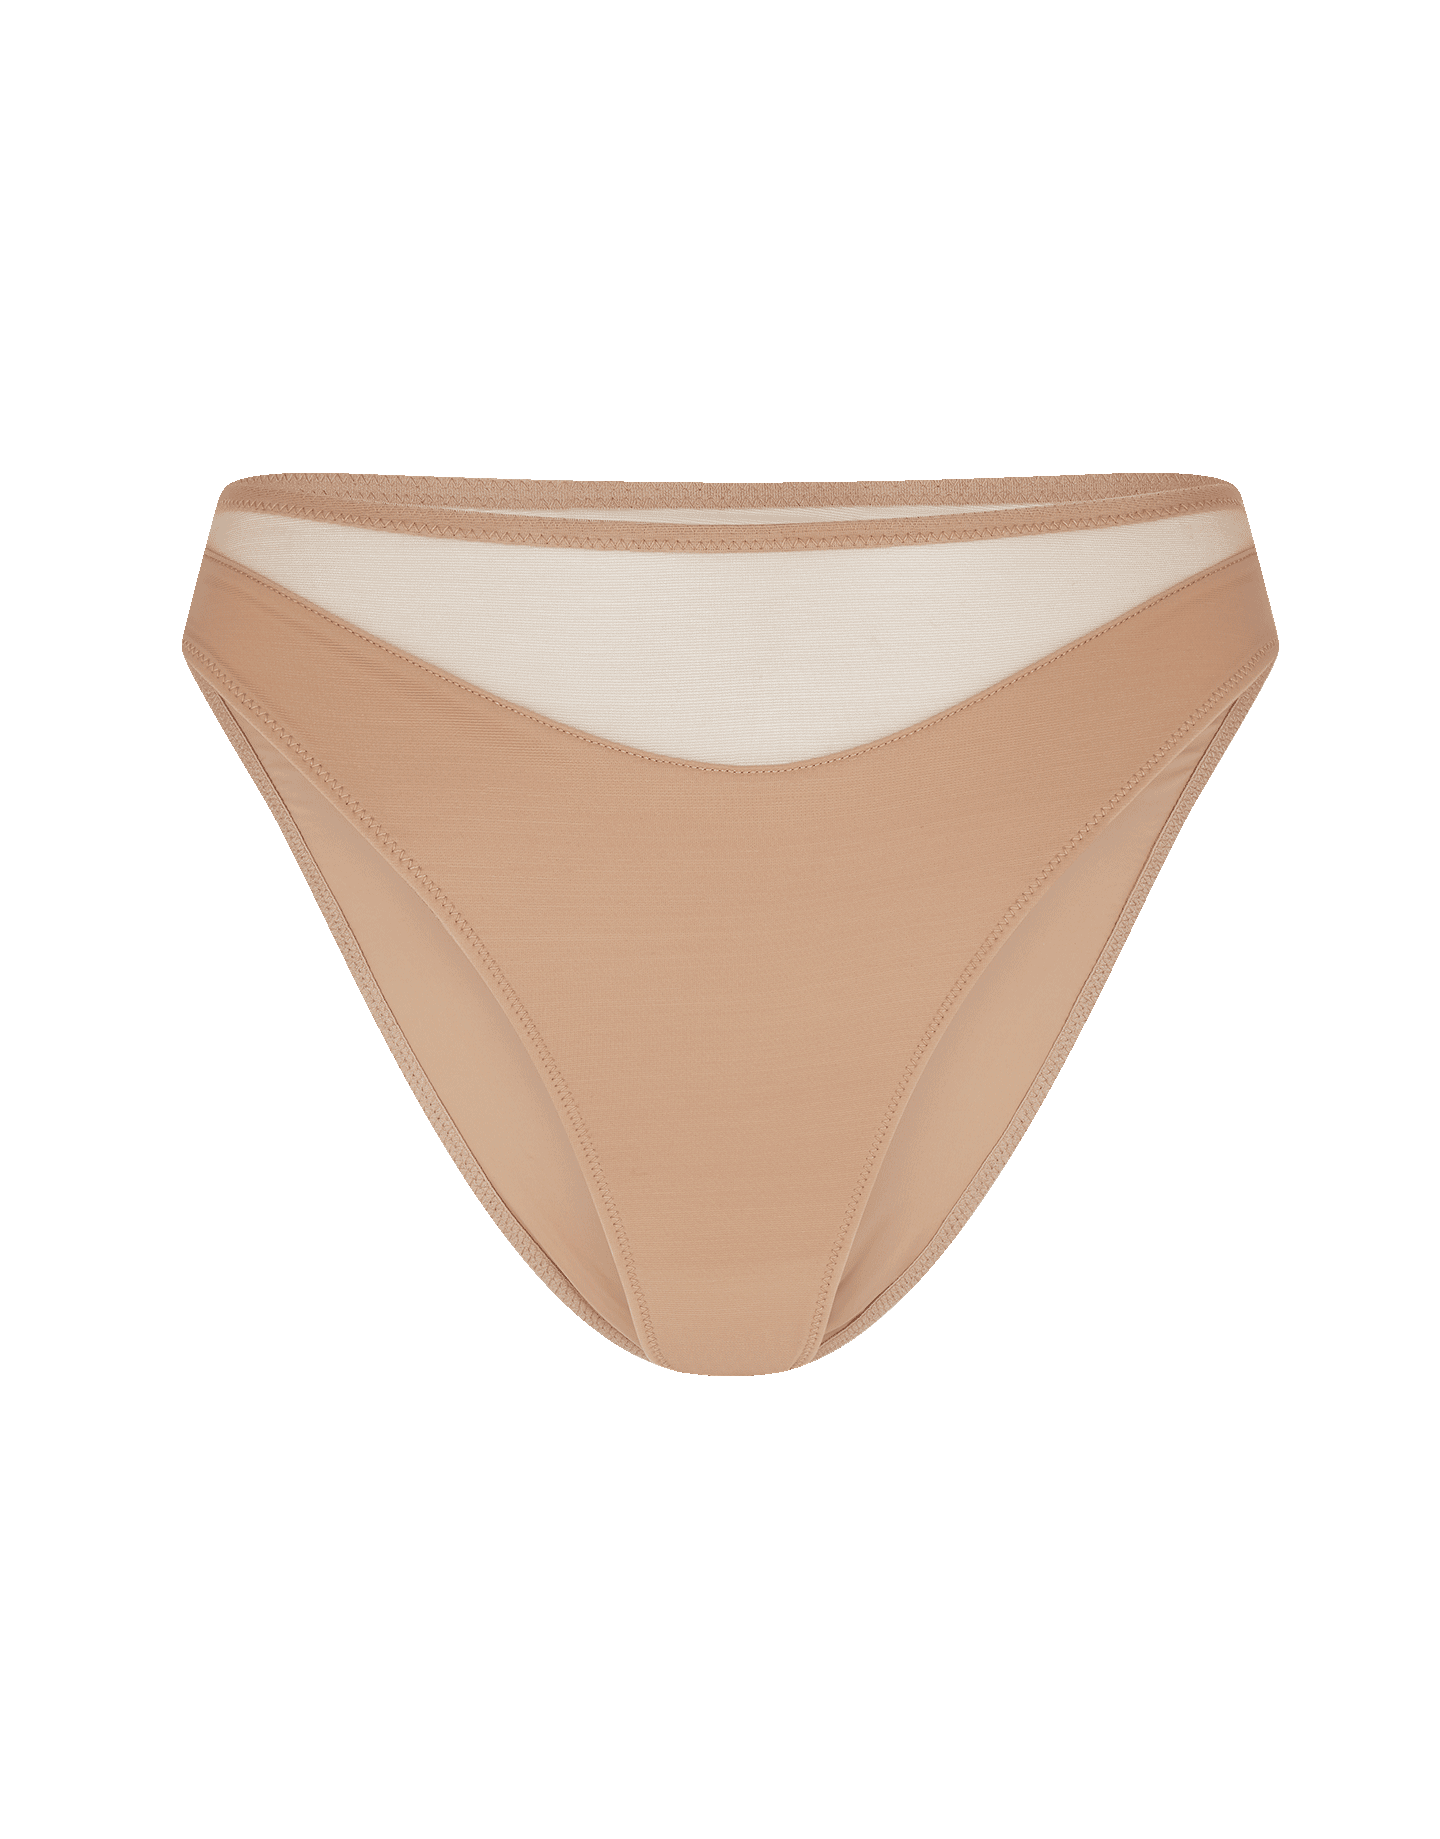 Lucky High Leg Brief in Noisette | Agent Provocateur All Lingerie